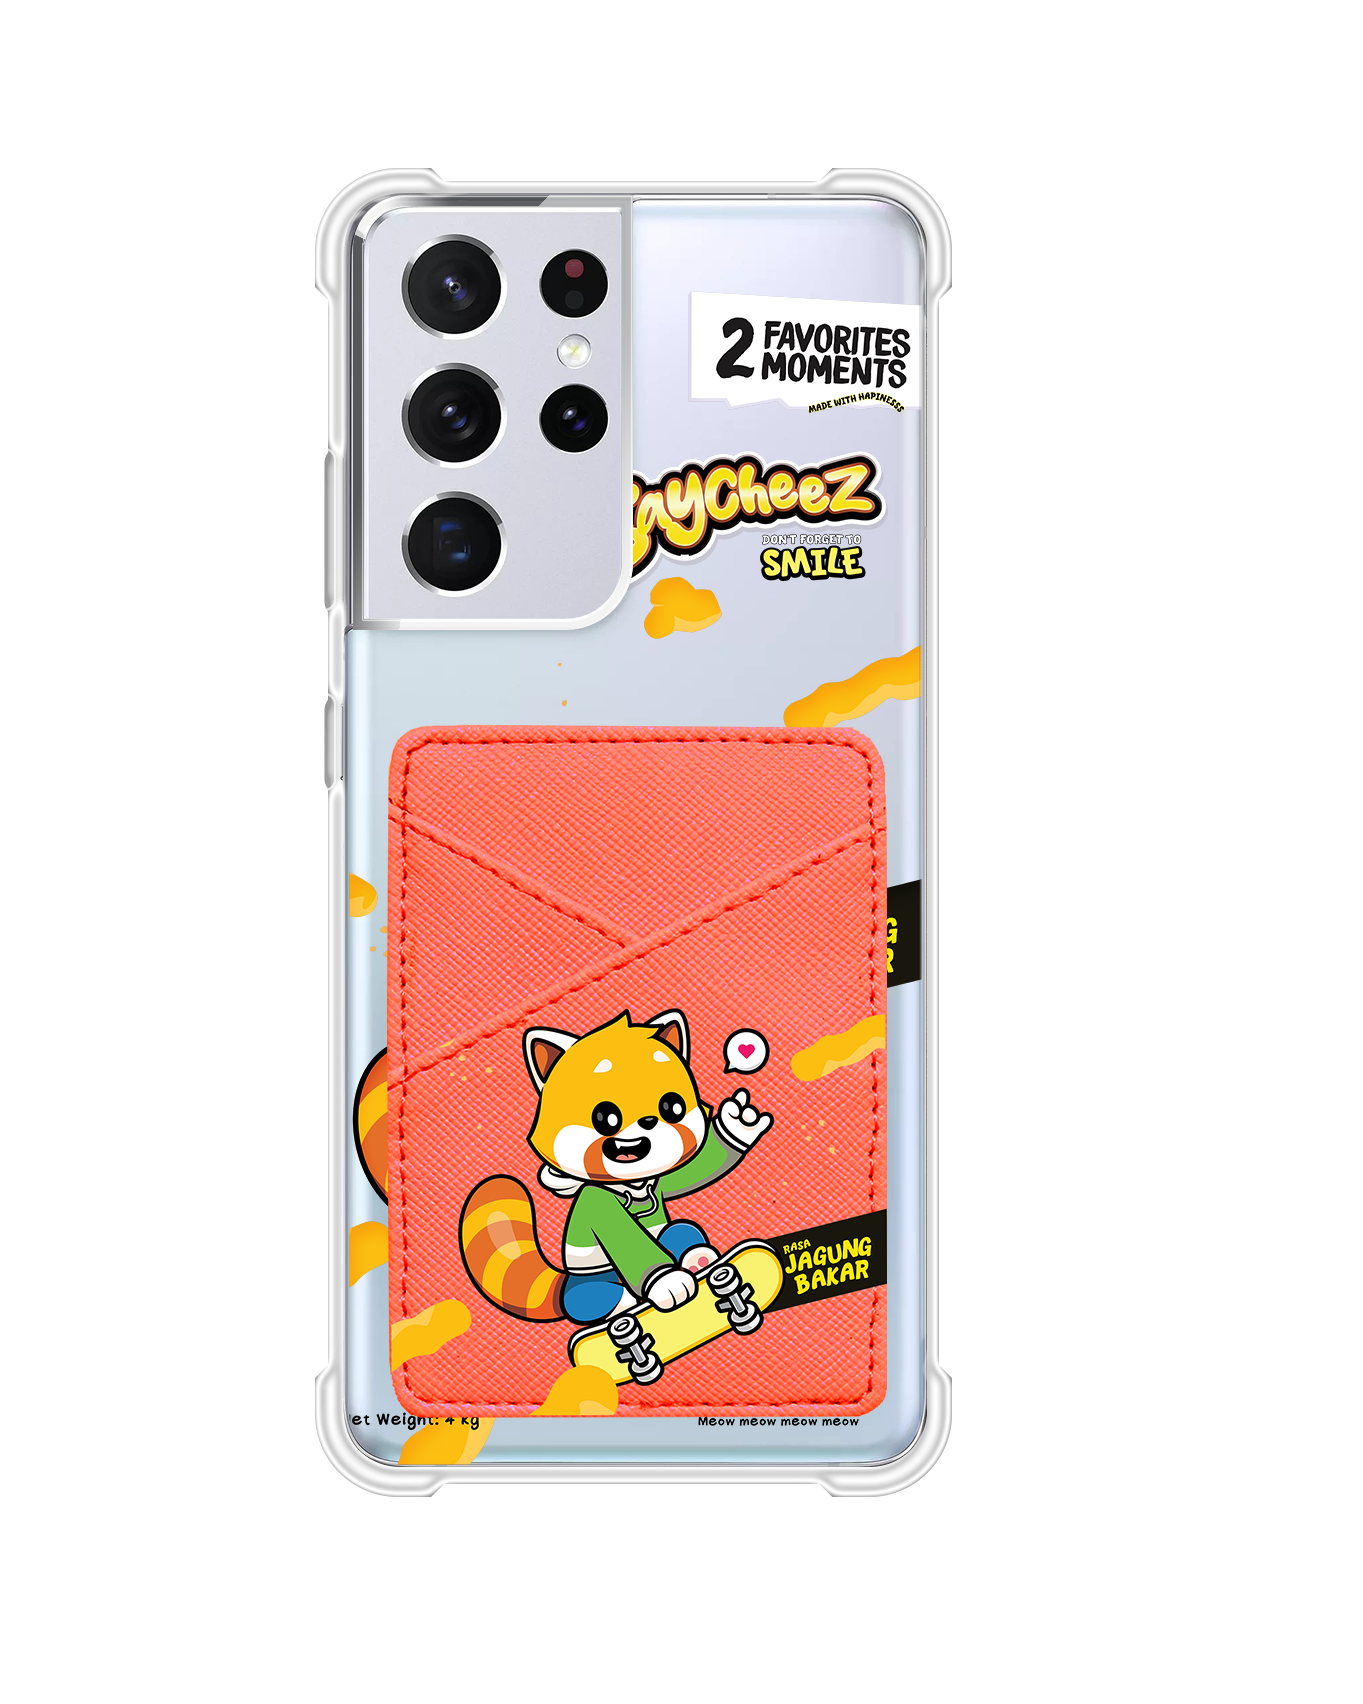 Android Phone Wallet Case - Saycheez